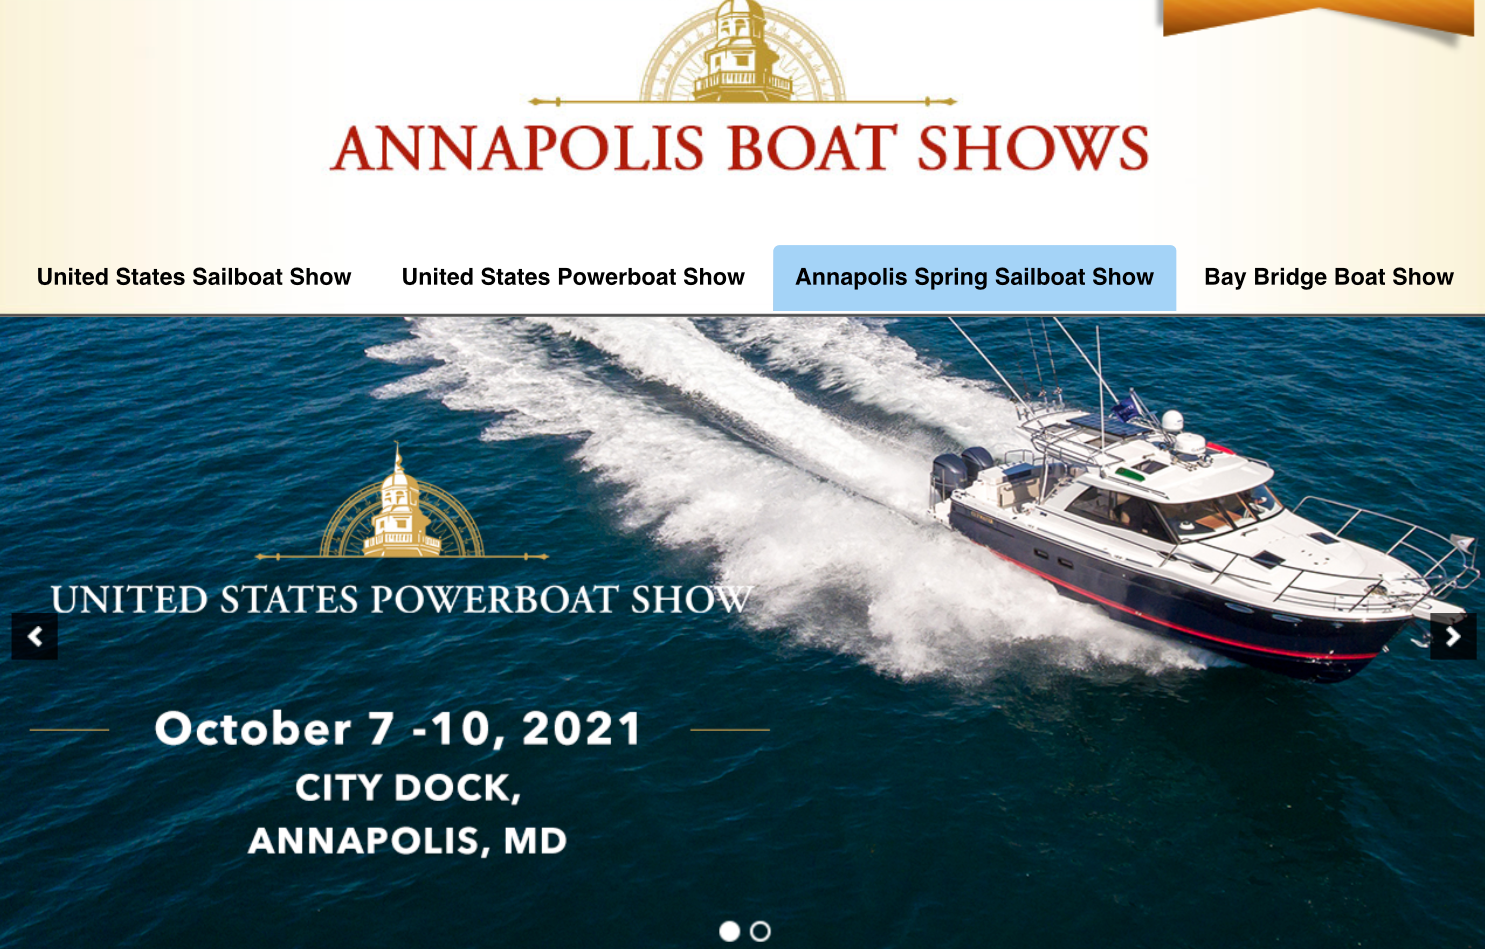 Annapolis Boat Shows is back on schedule